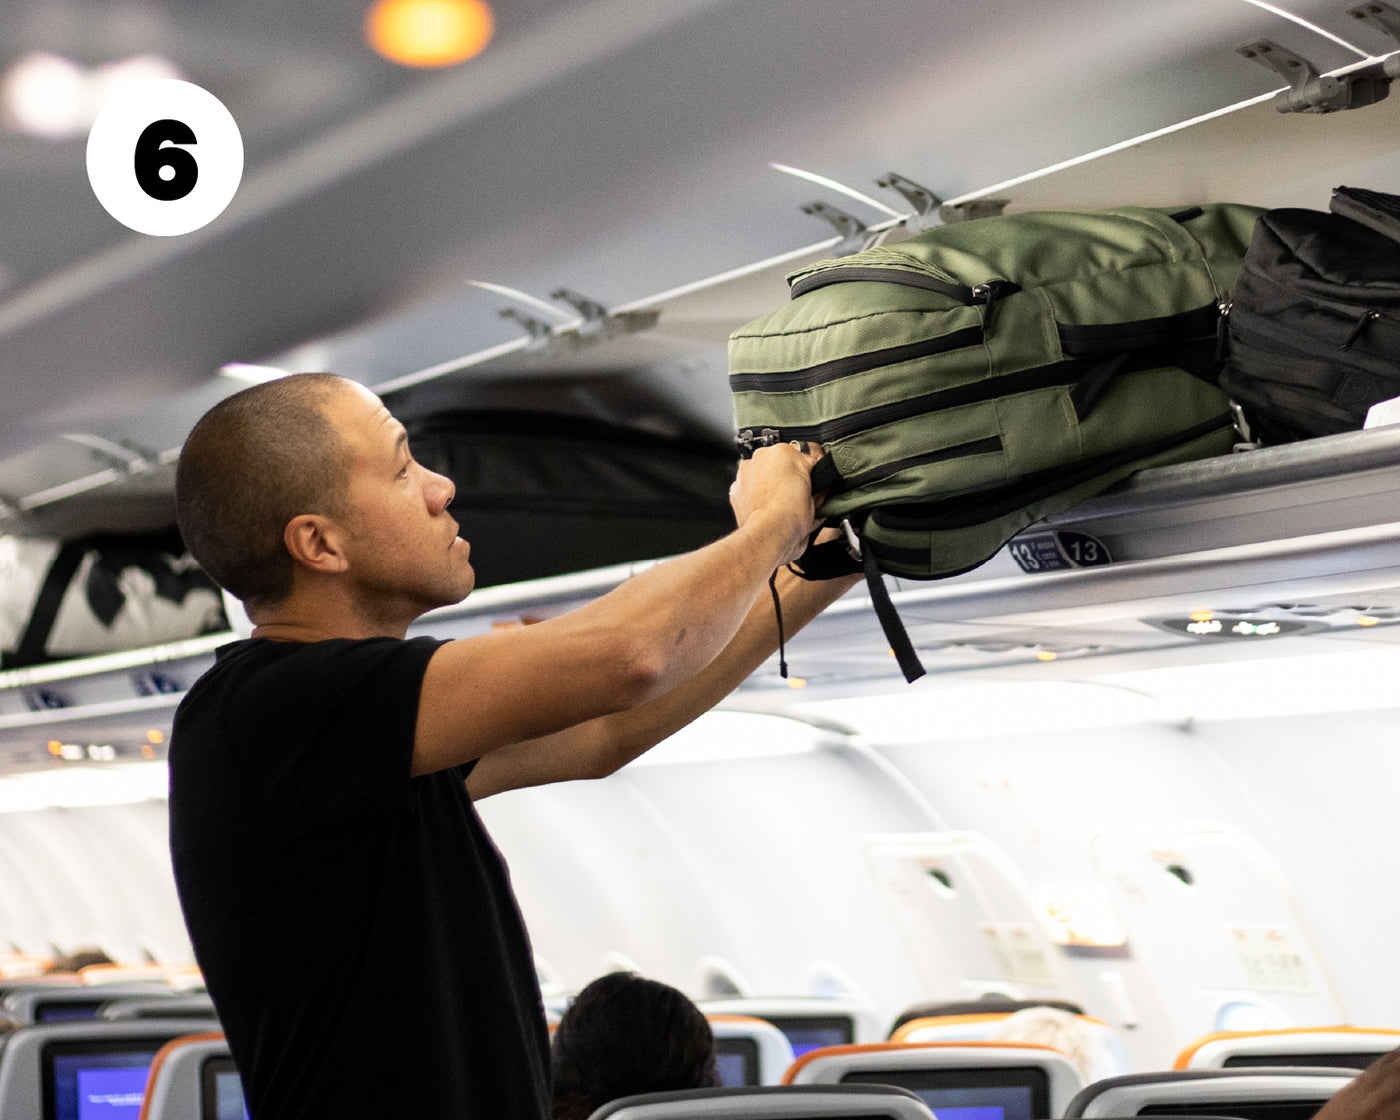 The Pakt Travel Backpack placed in the overhead compartment of an airplane